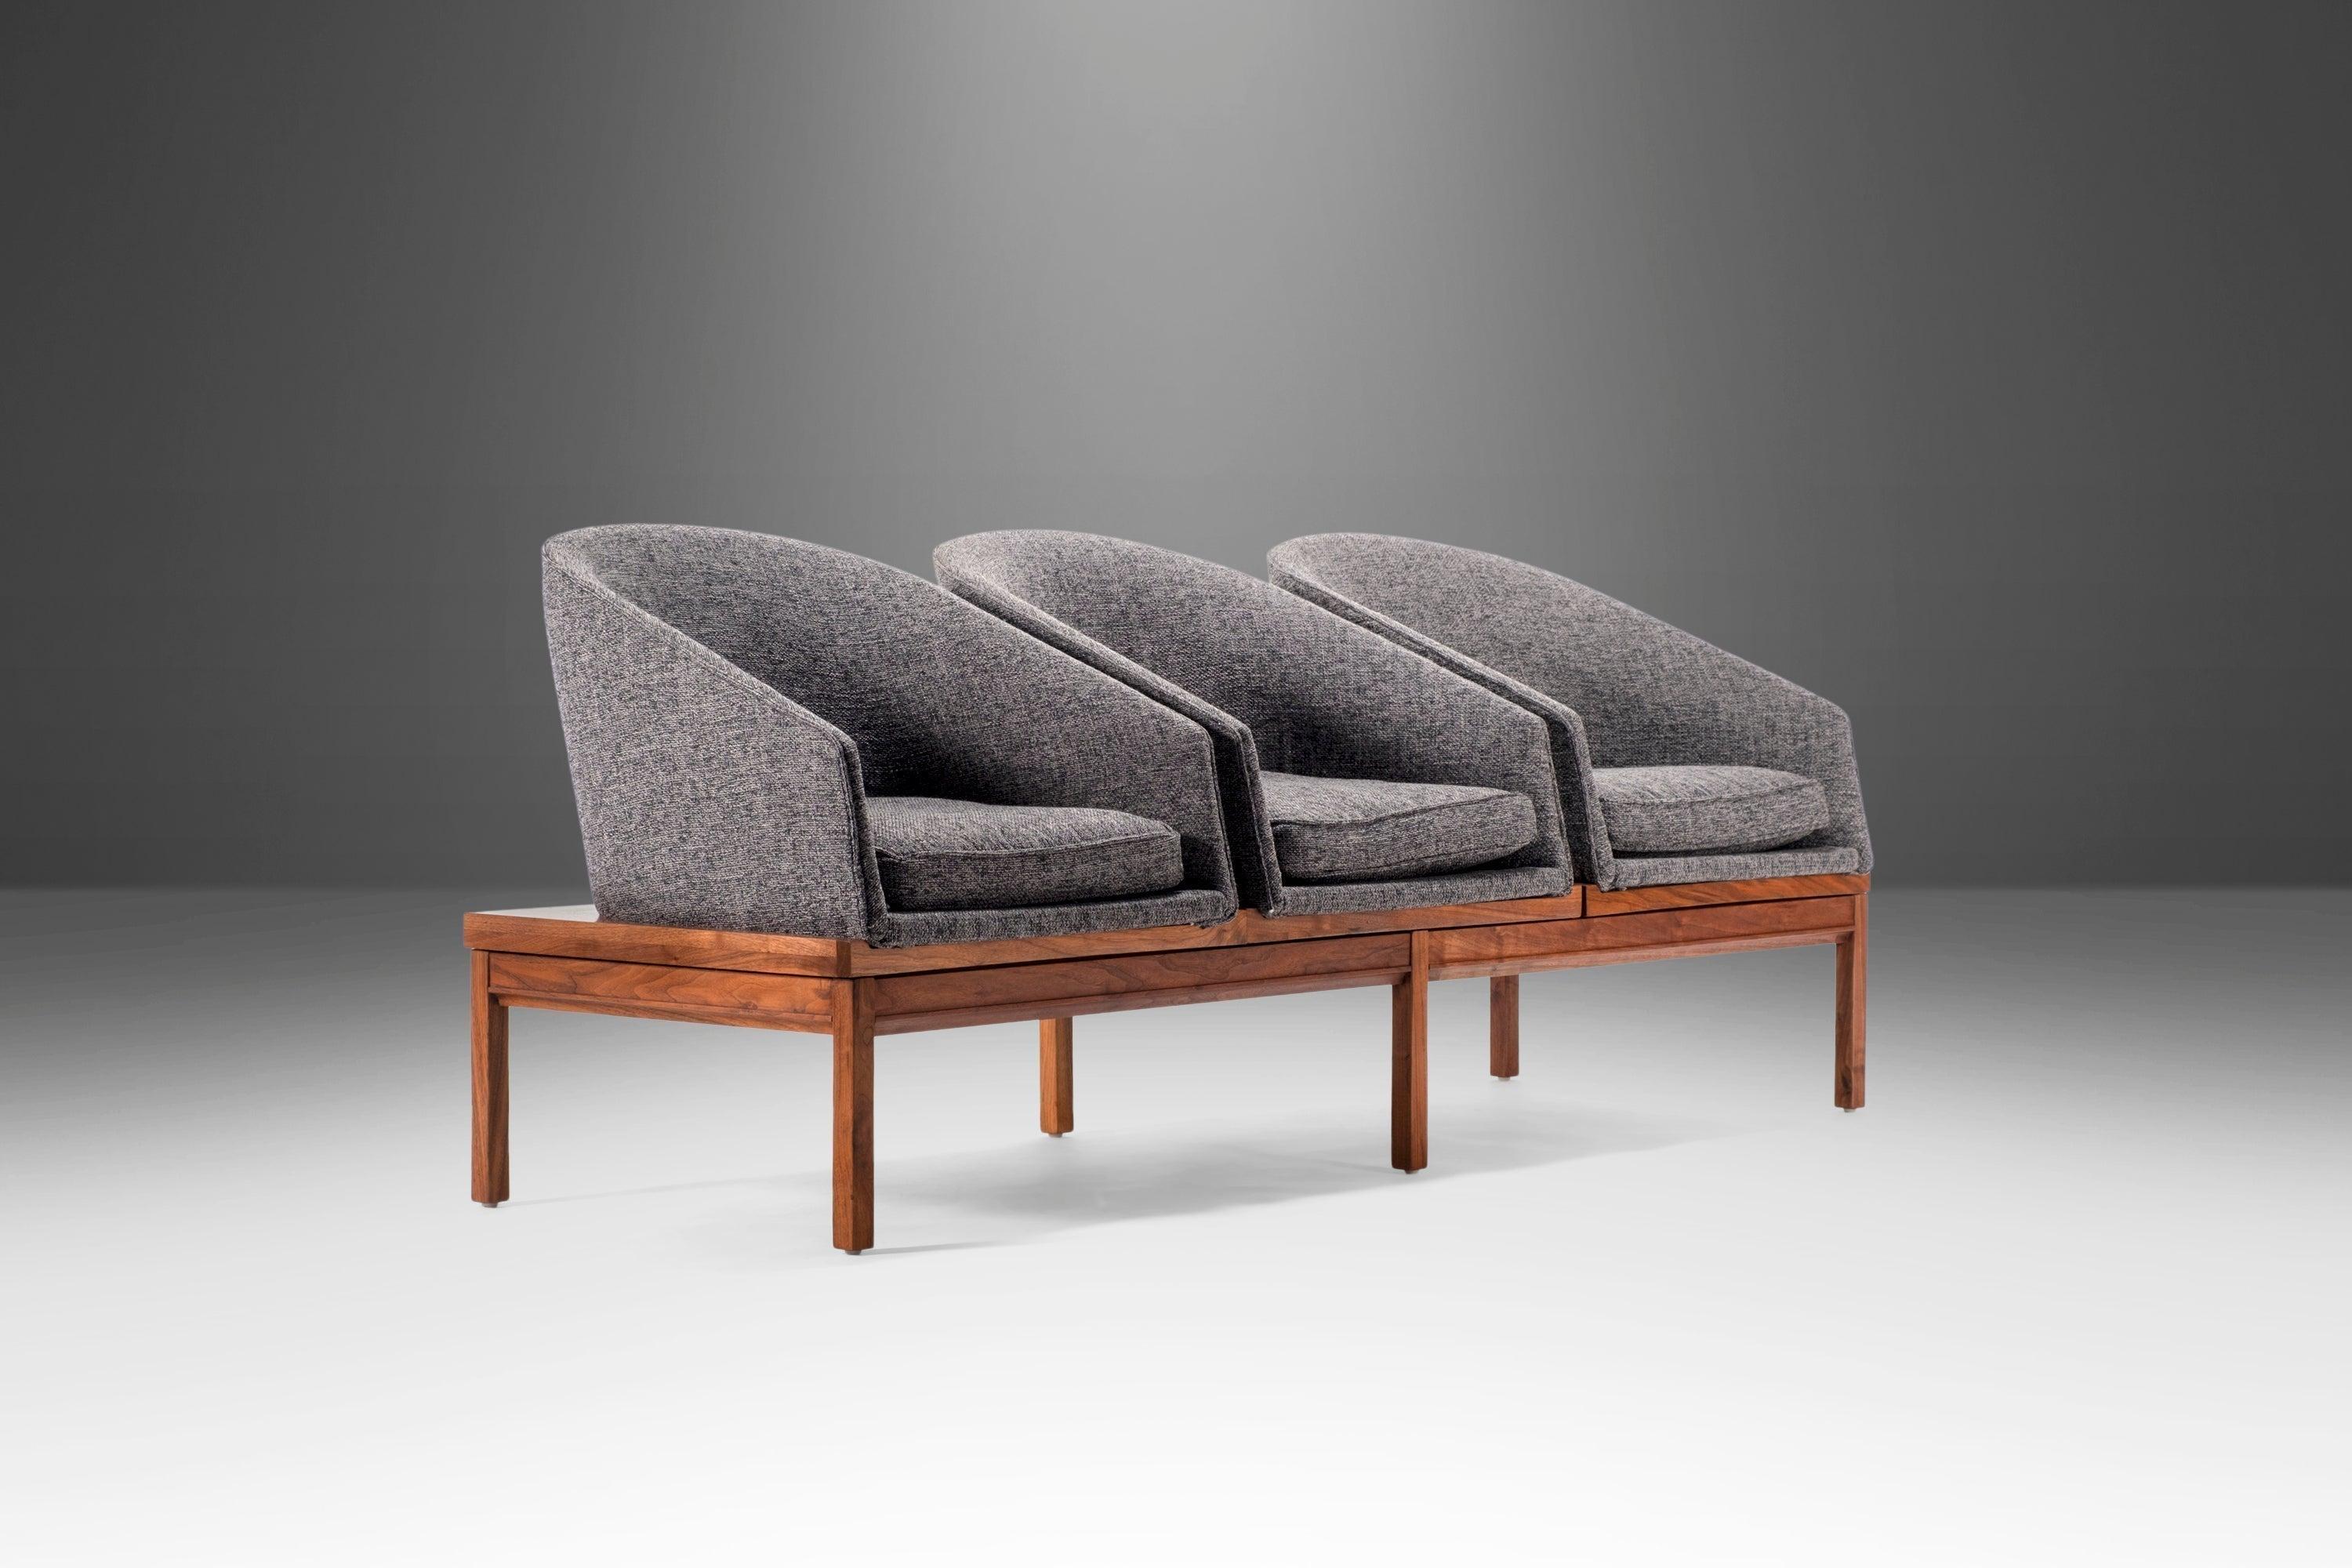 Mid-20th Century Three (3) Seat & Two (2) Seat Modular Benches Attributed to Arthur Umanoff, 1960